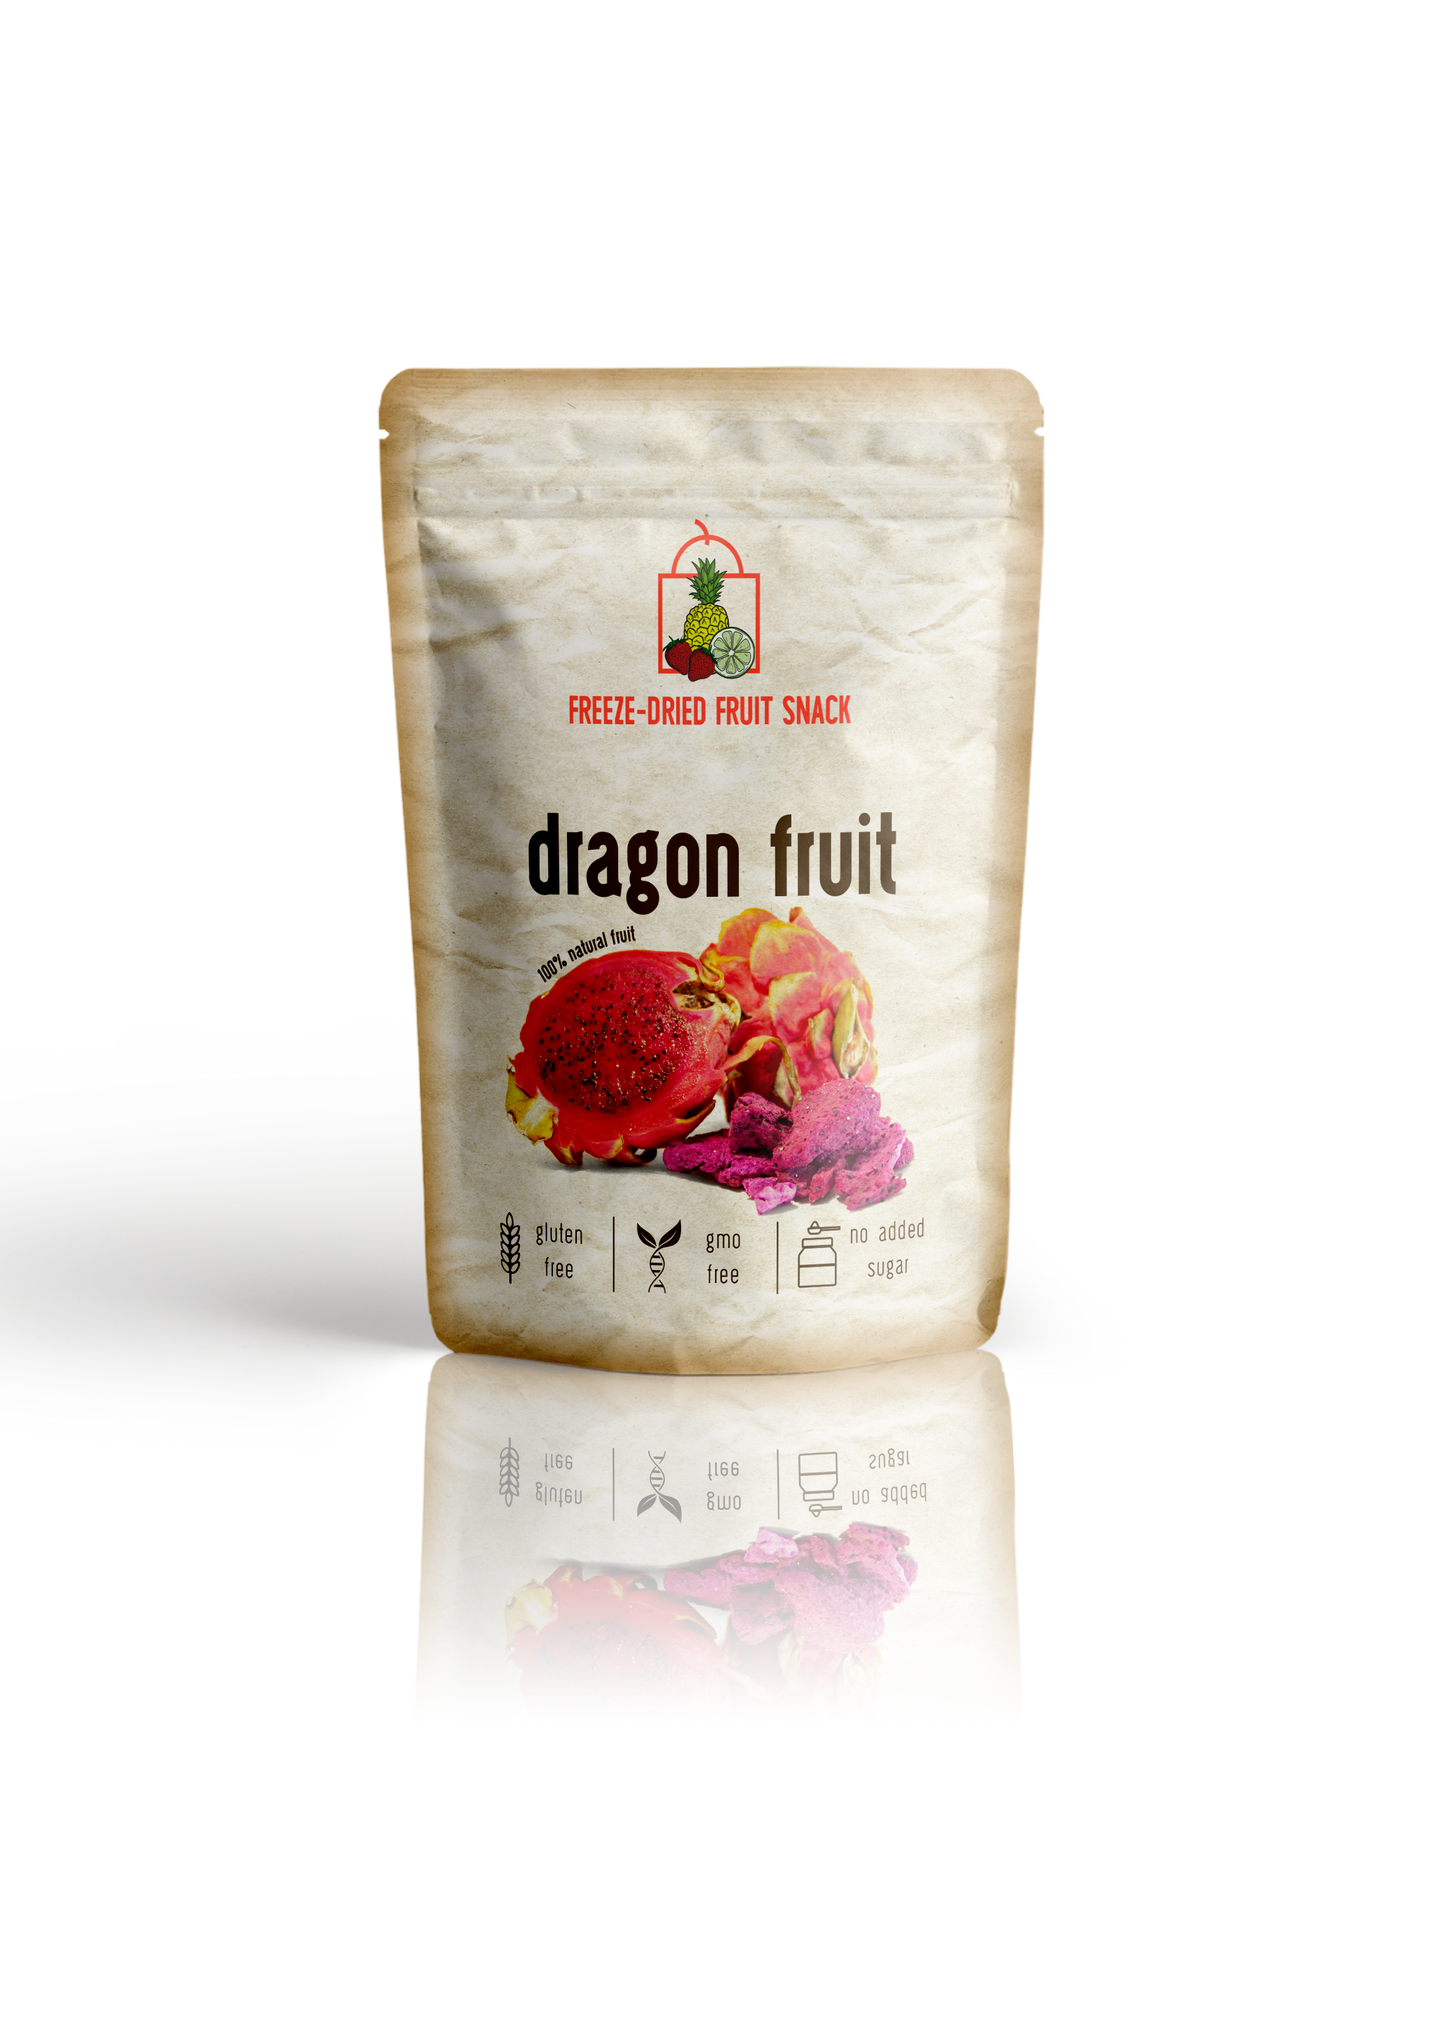 Freeze Dried Dragon Fruit Snack by The Rotten Fruit Box